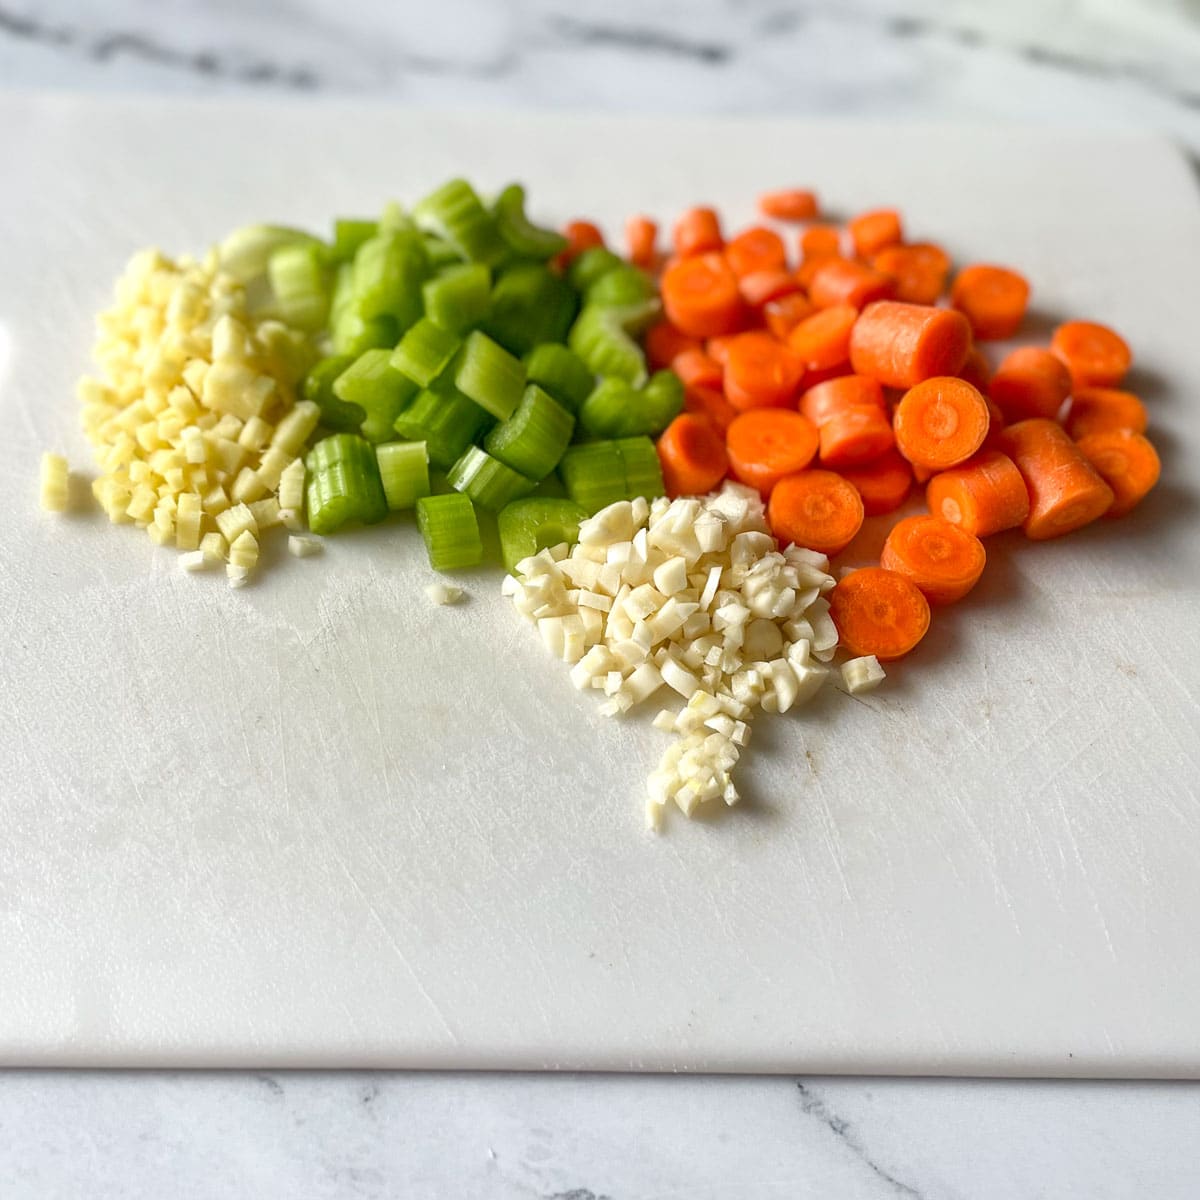 Chopped ginger, garlic, celery, and carrot sit on a white cutting board.